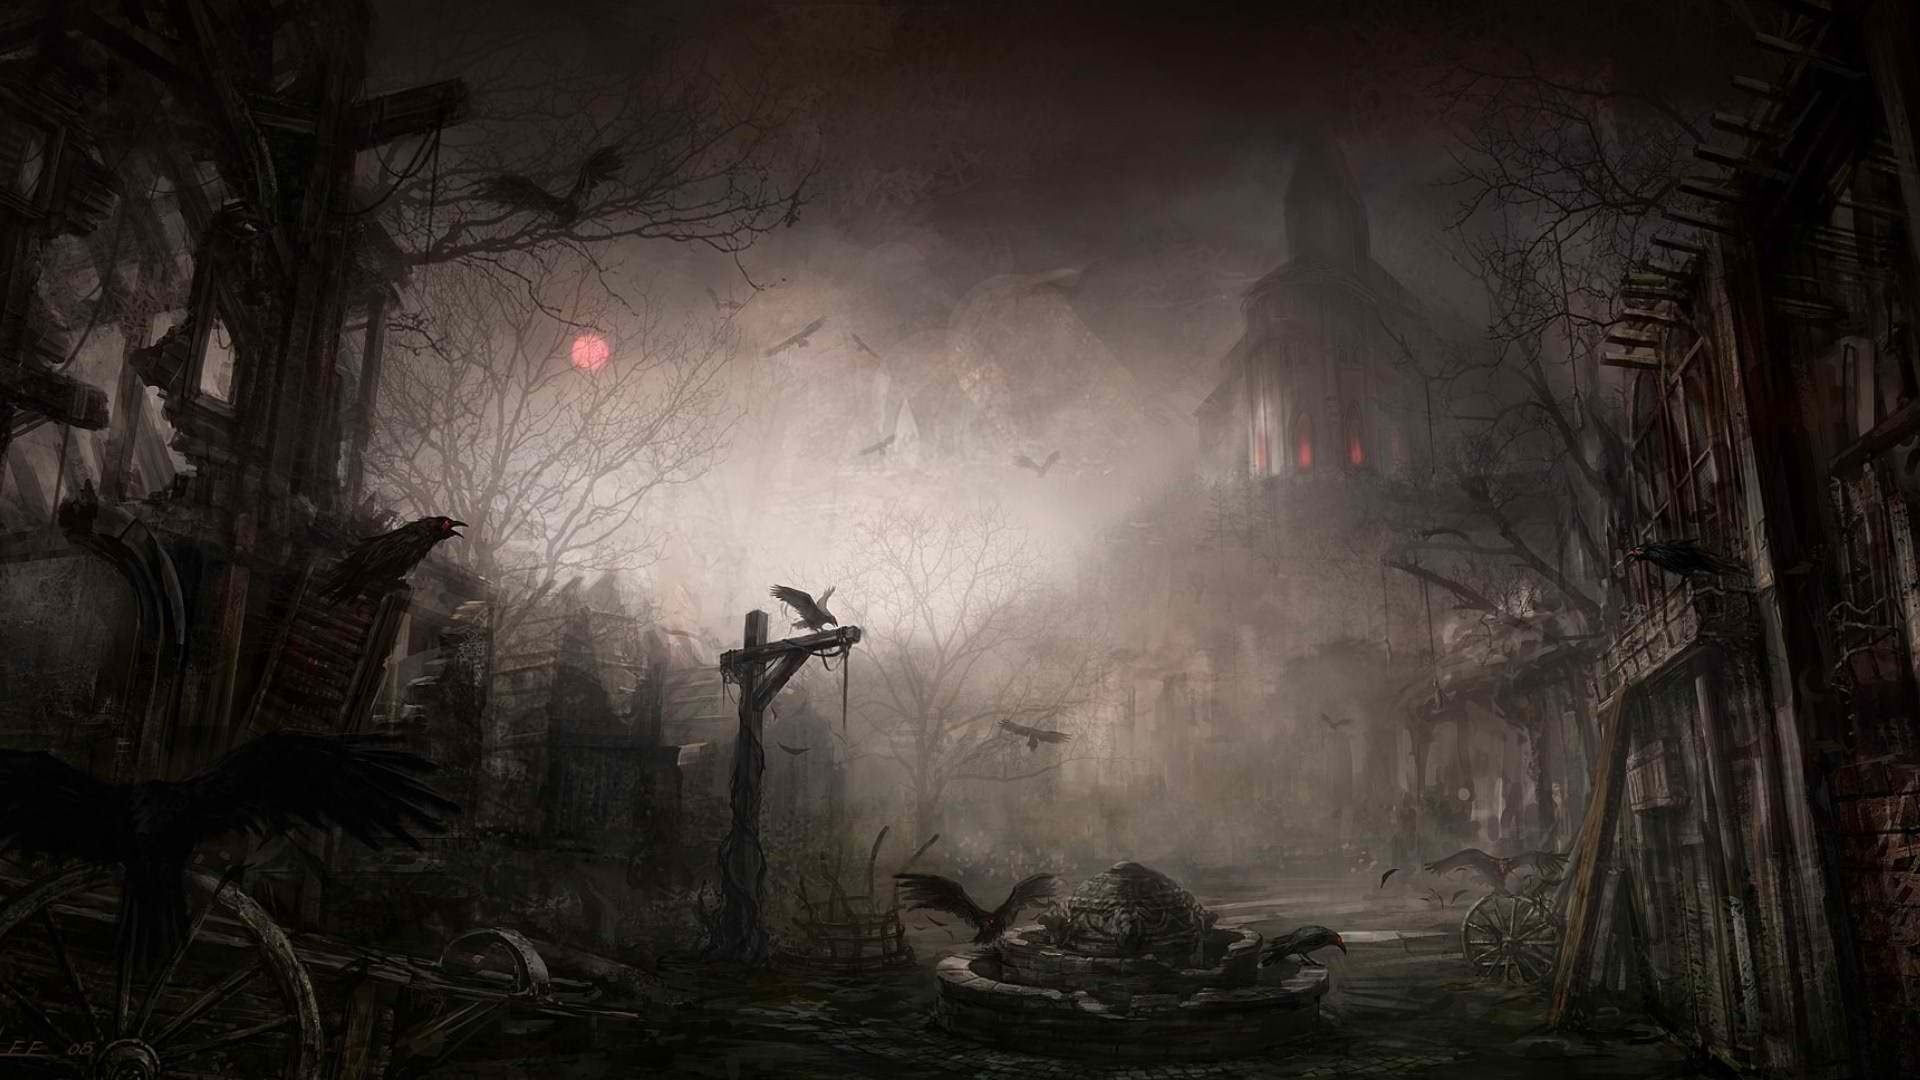 Scary background ·① Download free amazing backgrounds for desktop